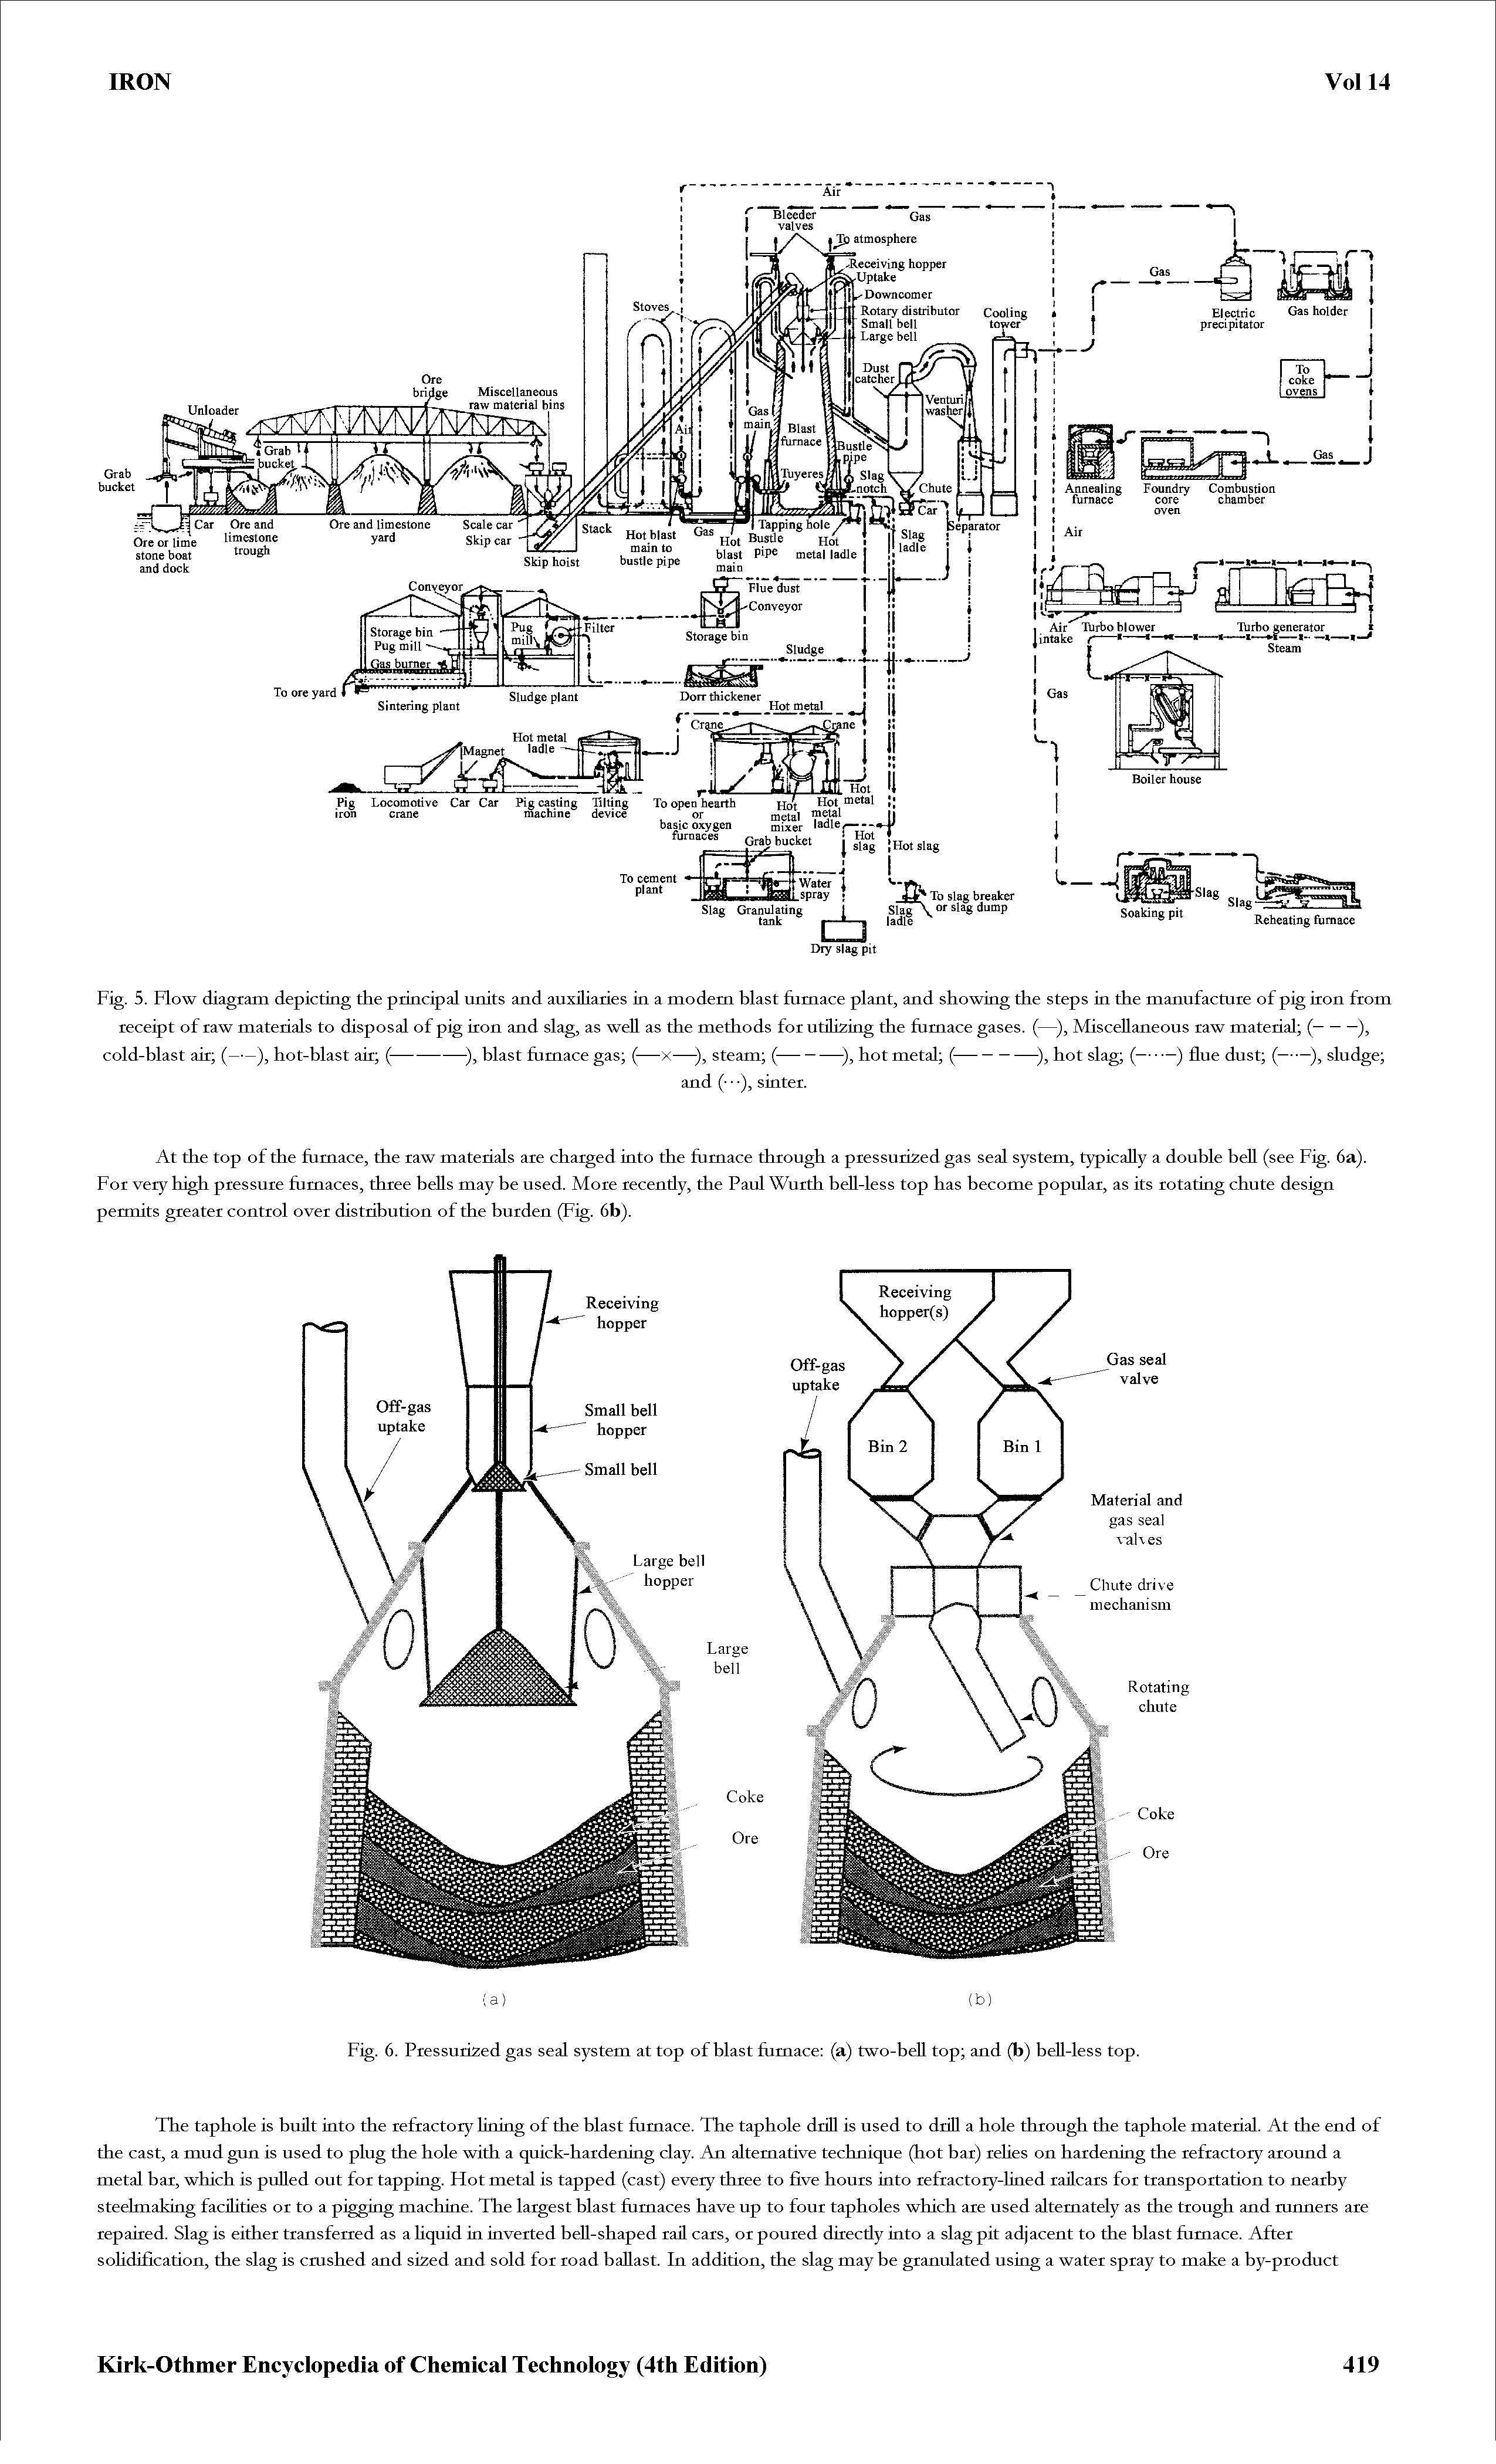 Fig. 5. Flow diagram depicting the principal units and auxiliaries in a modem blast furnace plant, and showing the steps in the manufacture of pig iron from...